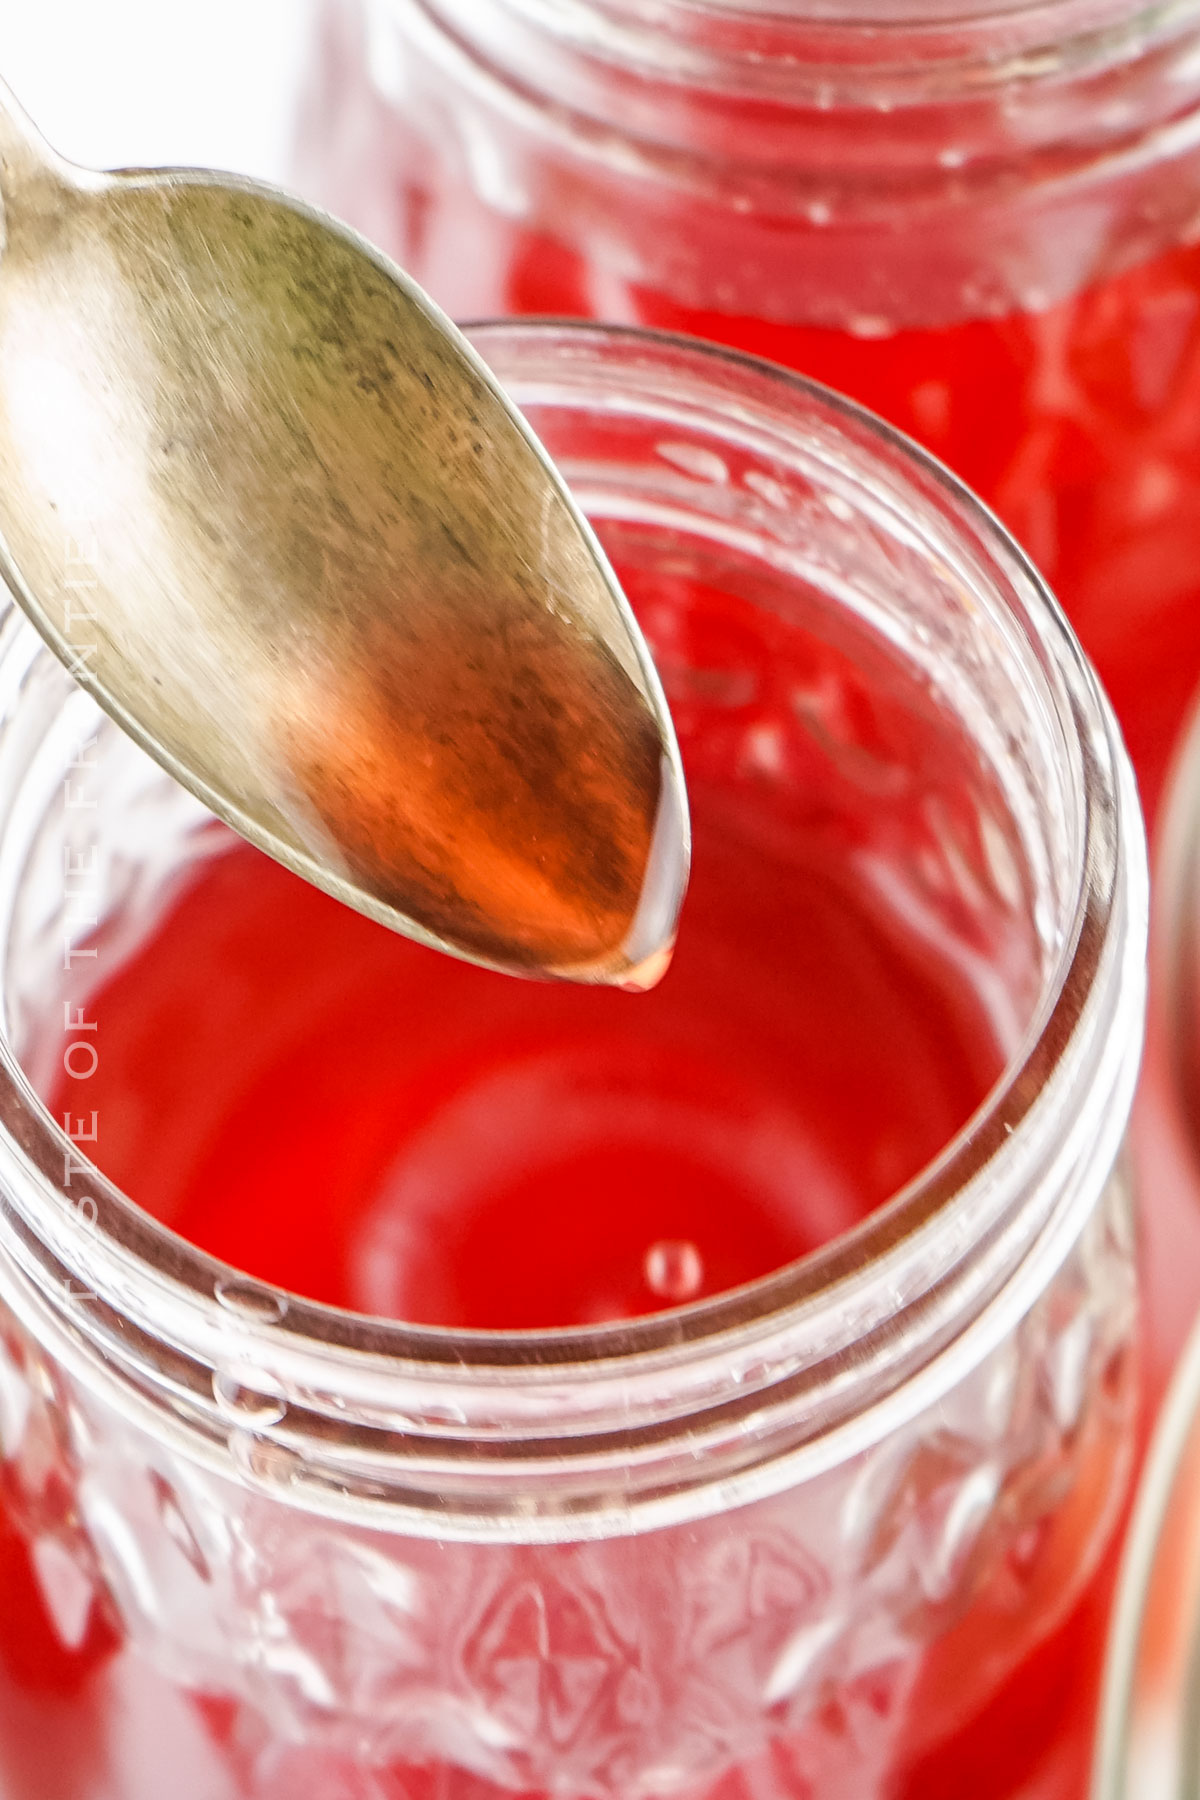 strawberry flavoring for drinks